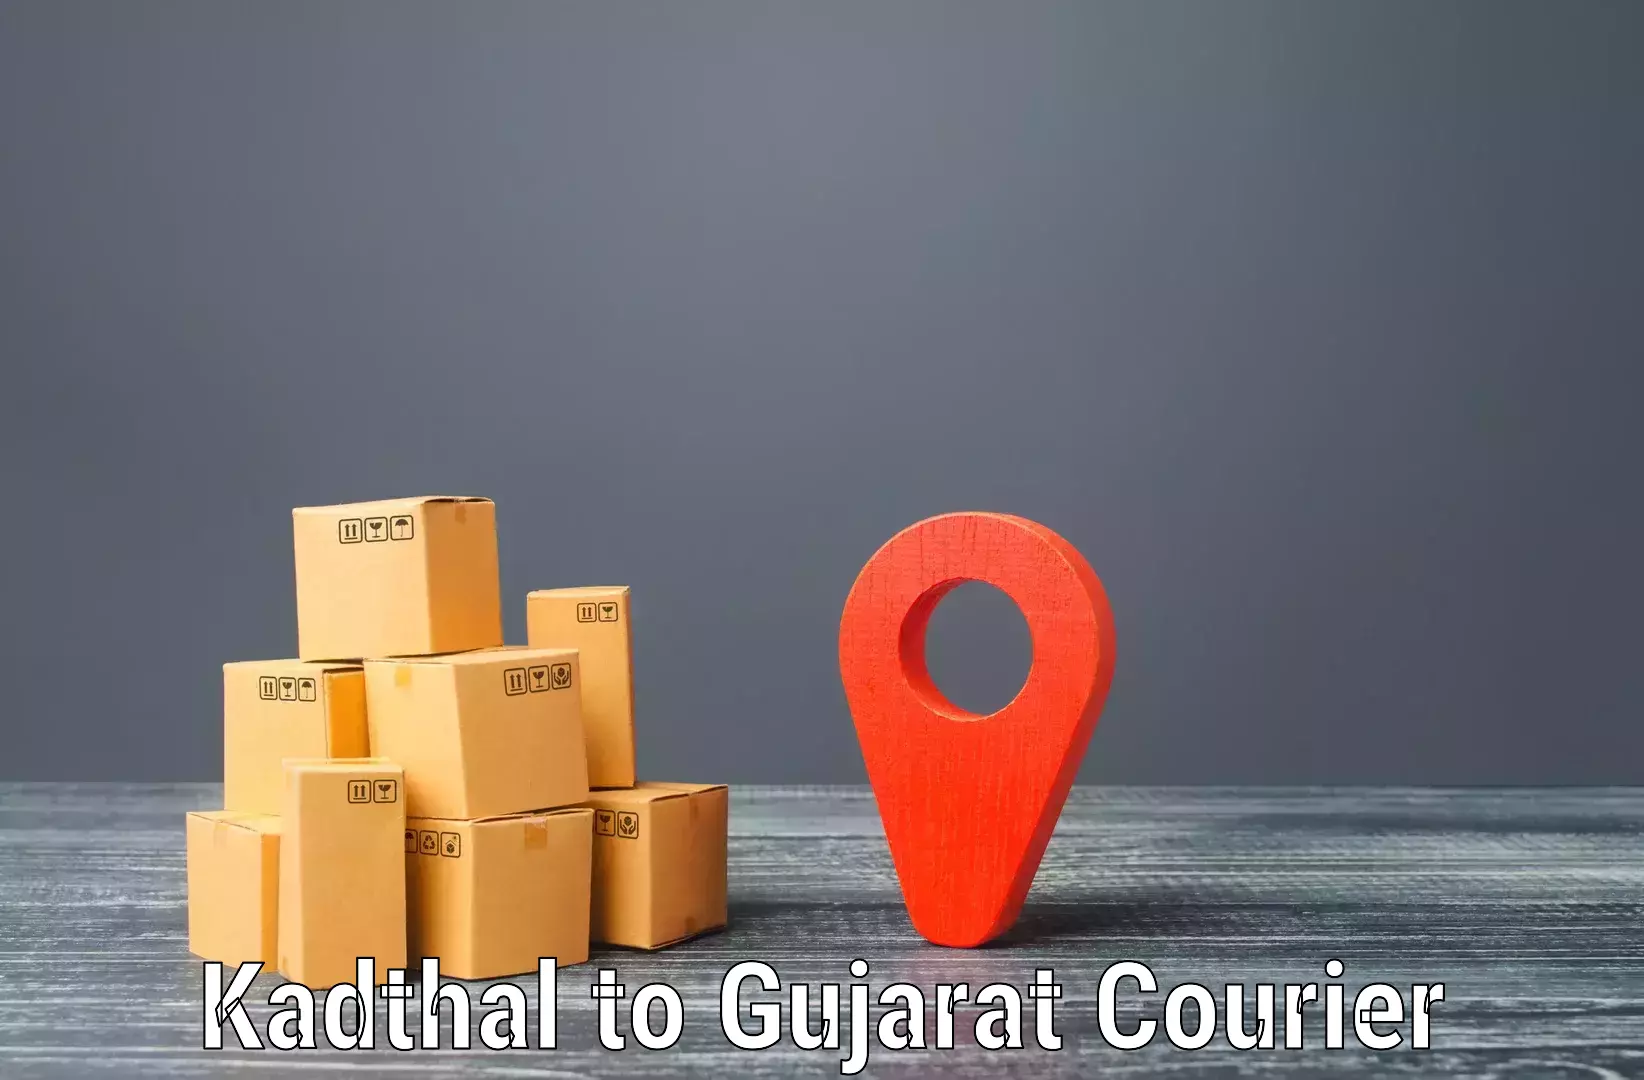 Reliable delivery network Kadthal to Patdi